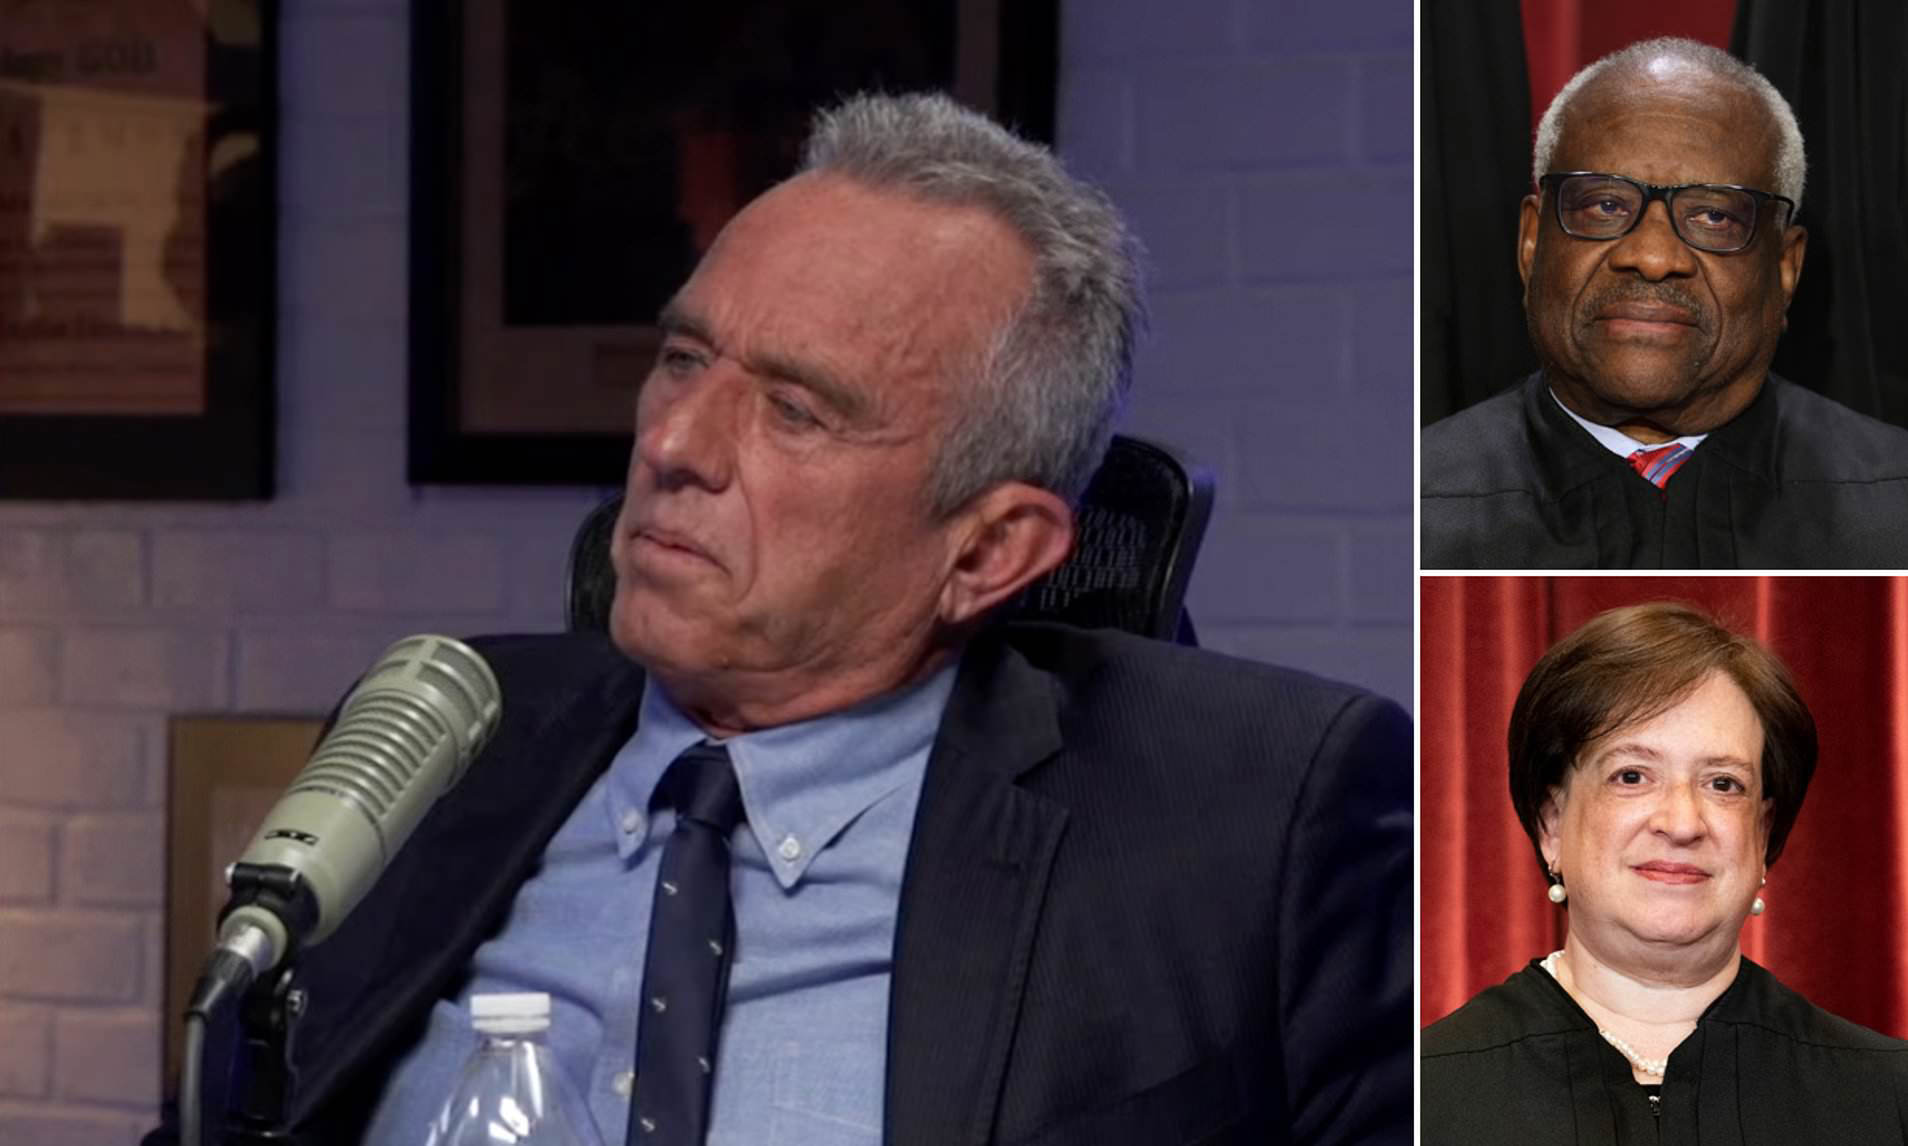 RFK Jr STUMPED when asked who he would choose to be on the Supreme